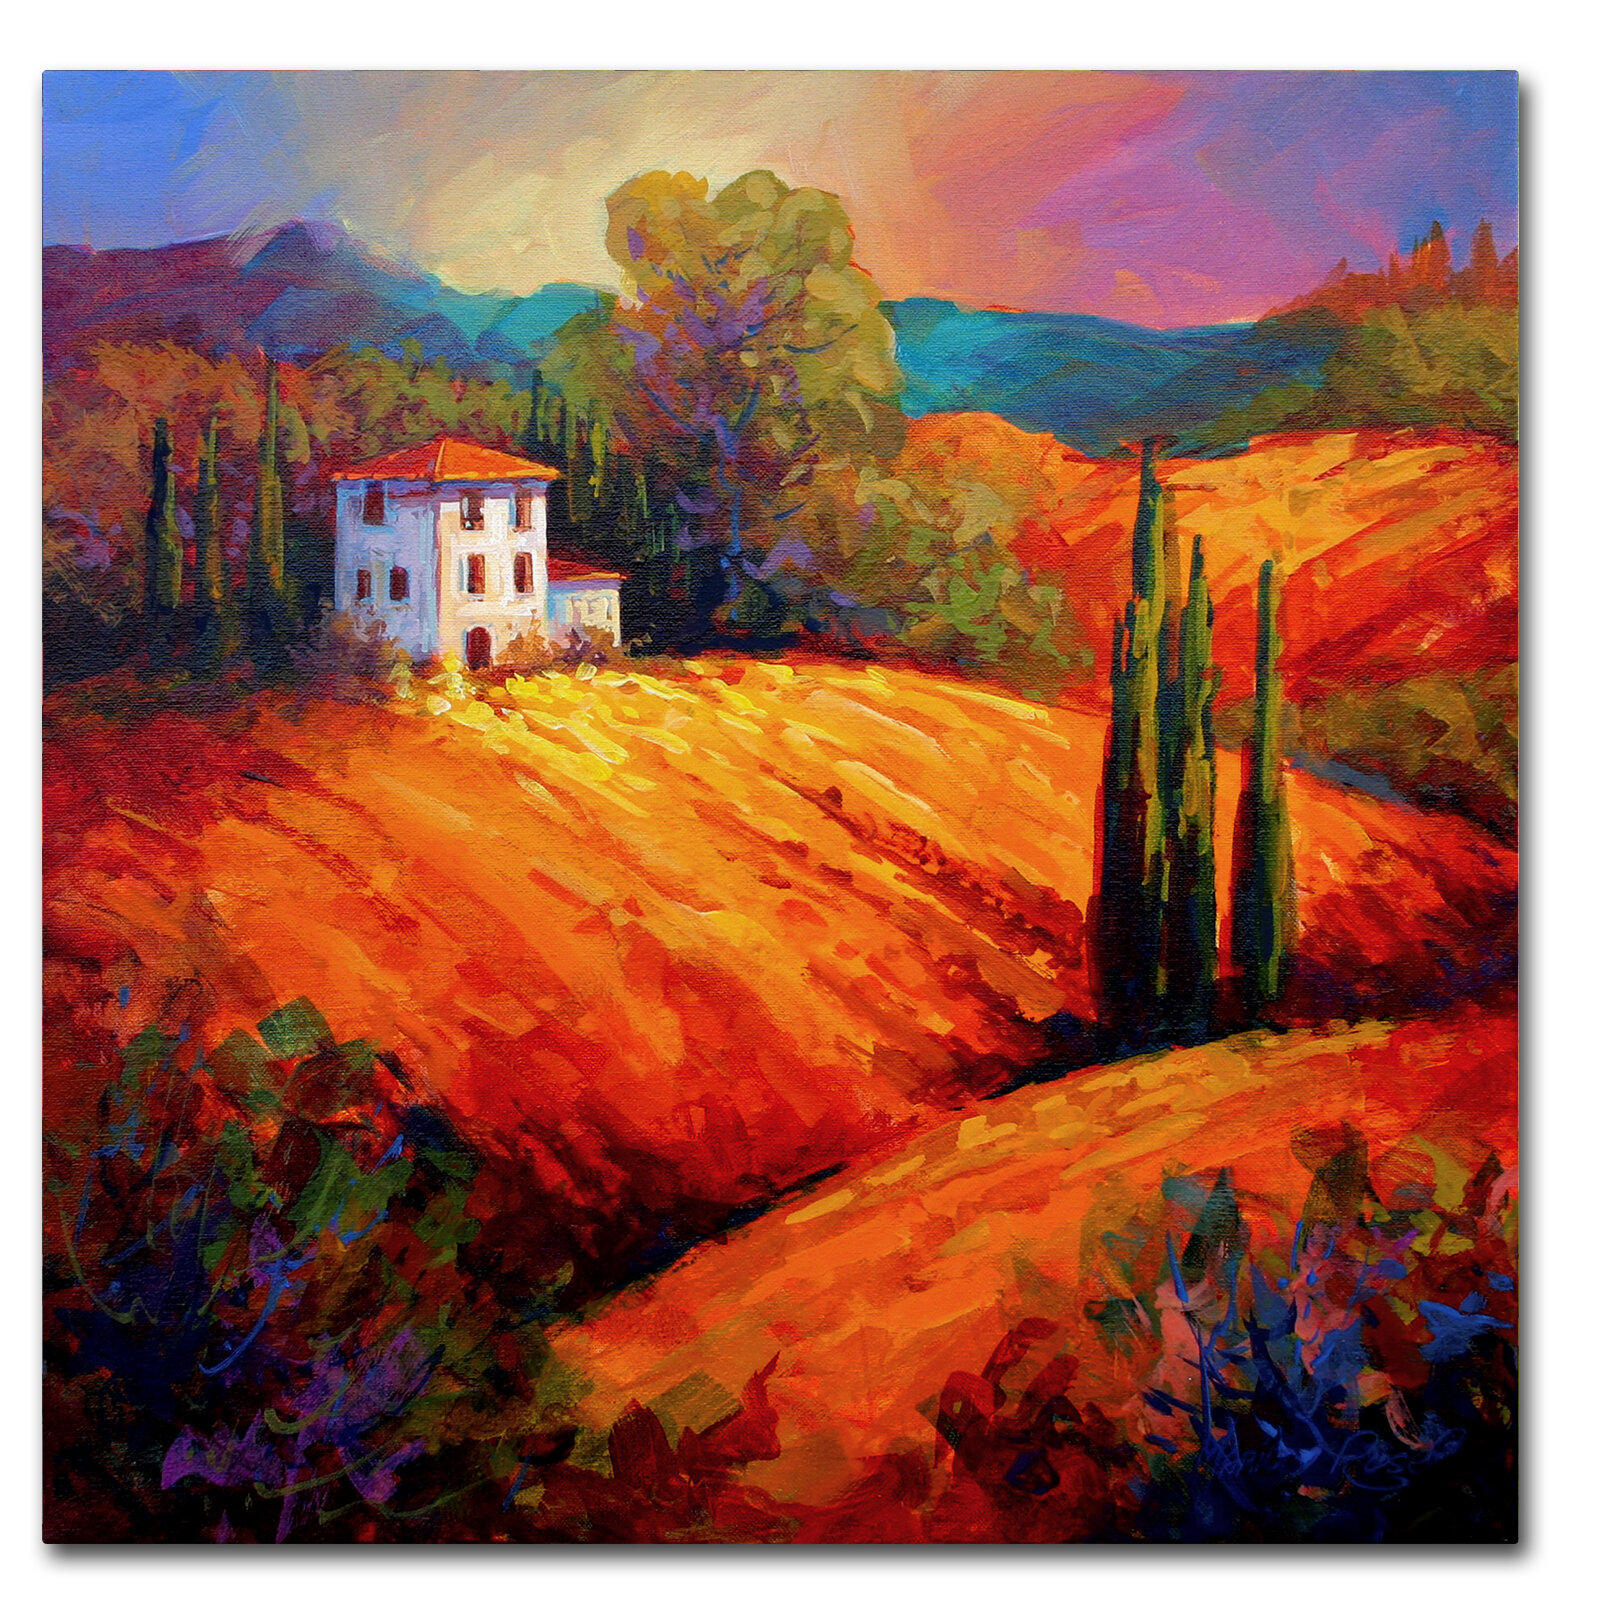 Oil Painting Tuscany Sunflower Fields: Large Original Canvas Art | Ready to  Hang | 32x40 inches - Stretched Canvas, Ready To Ship